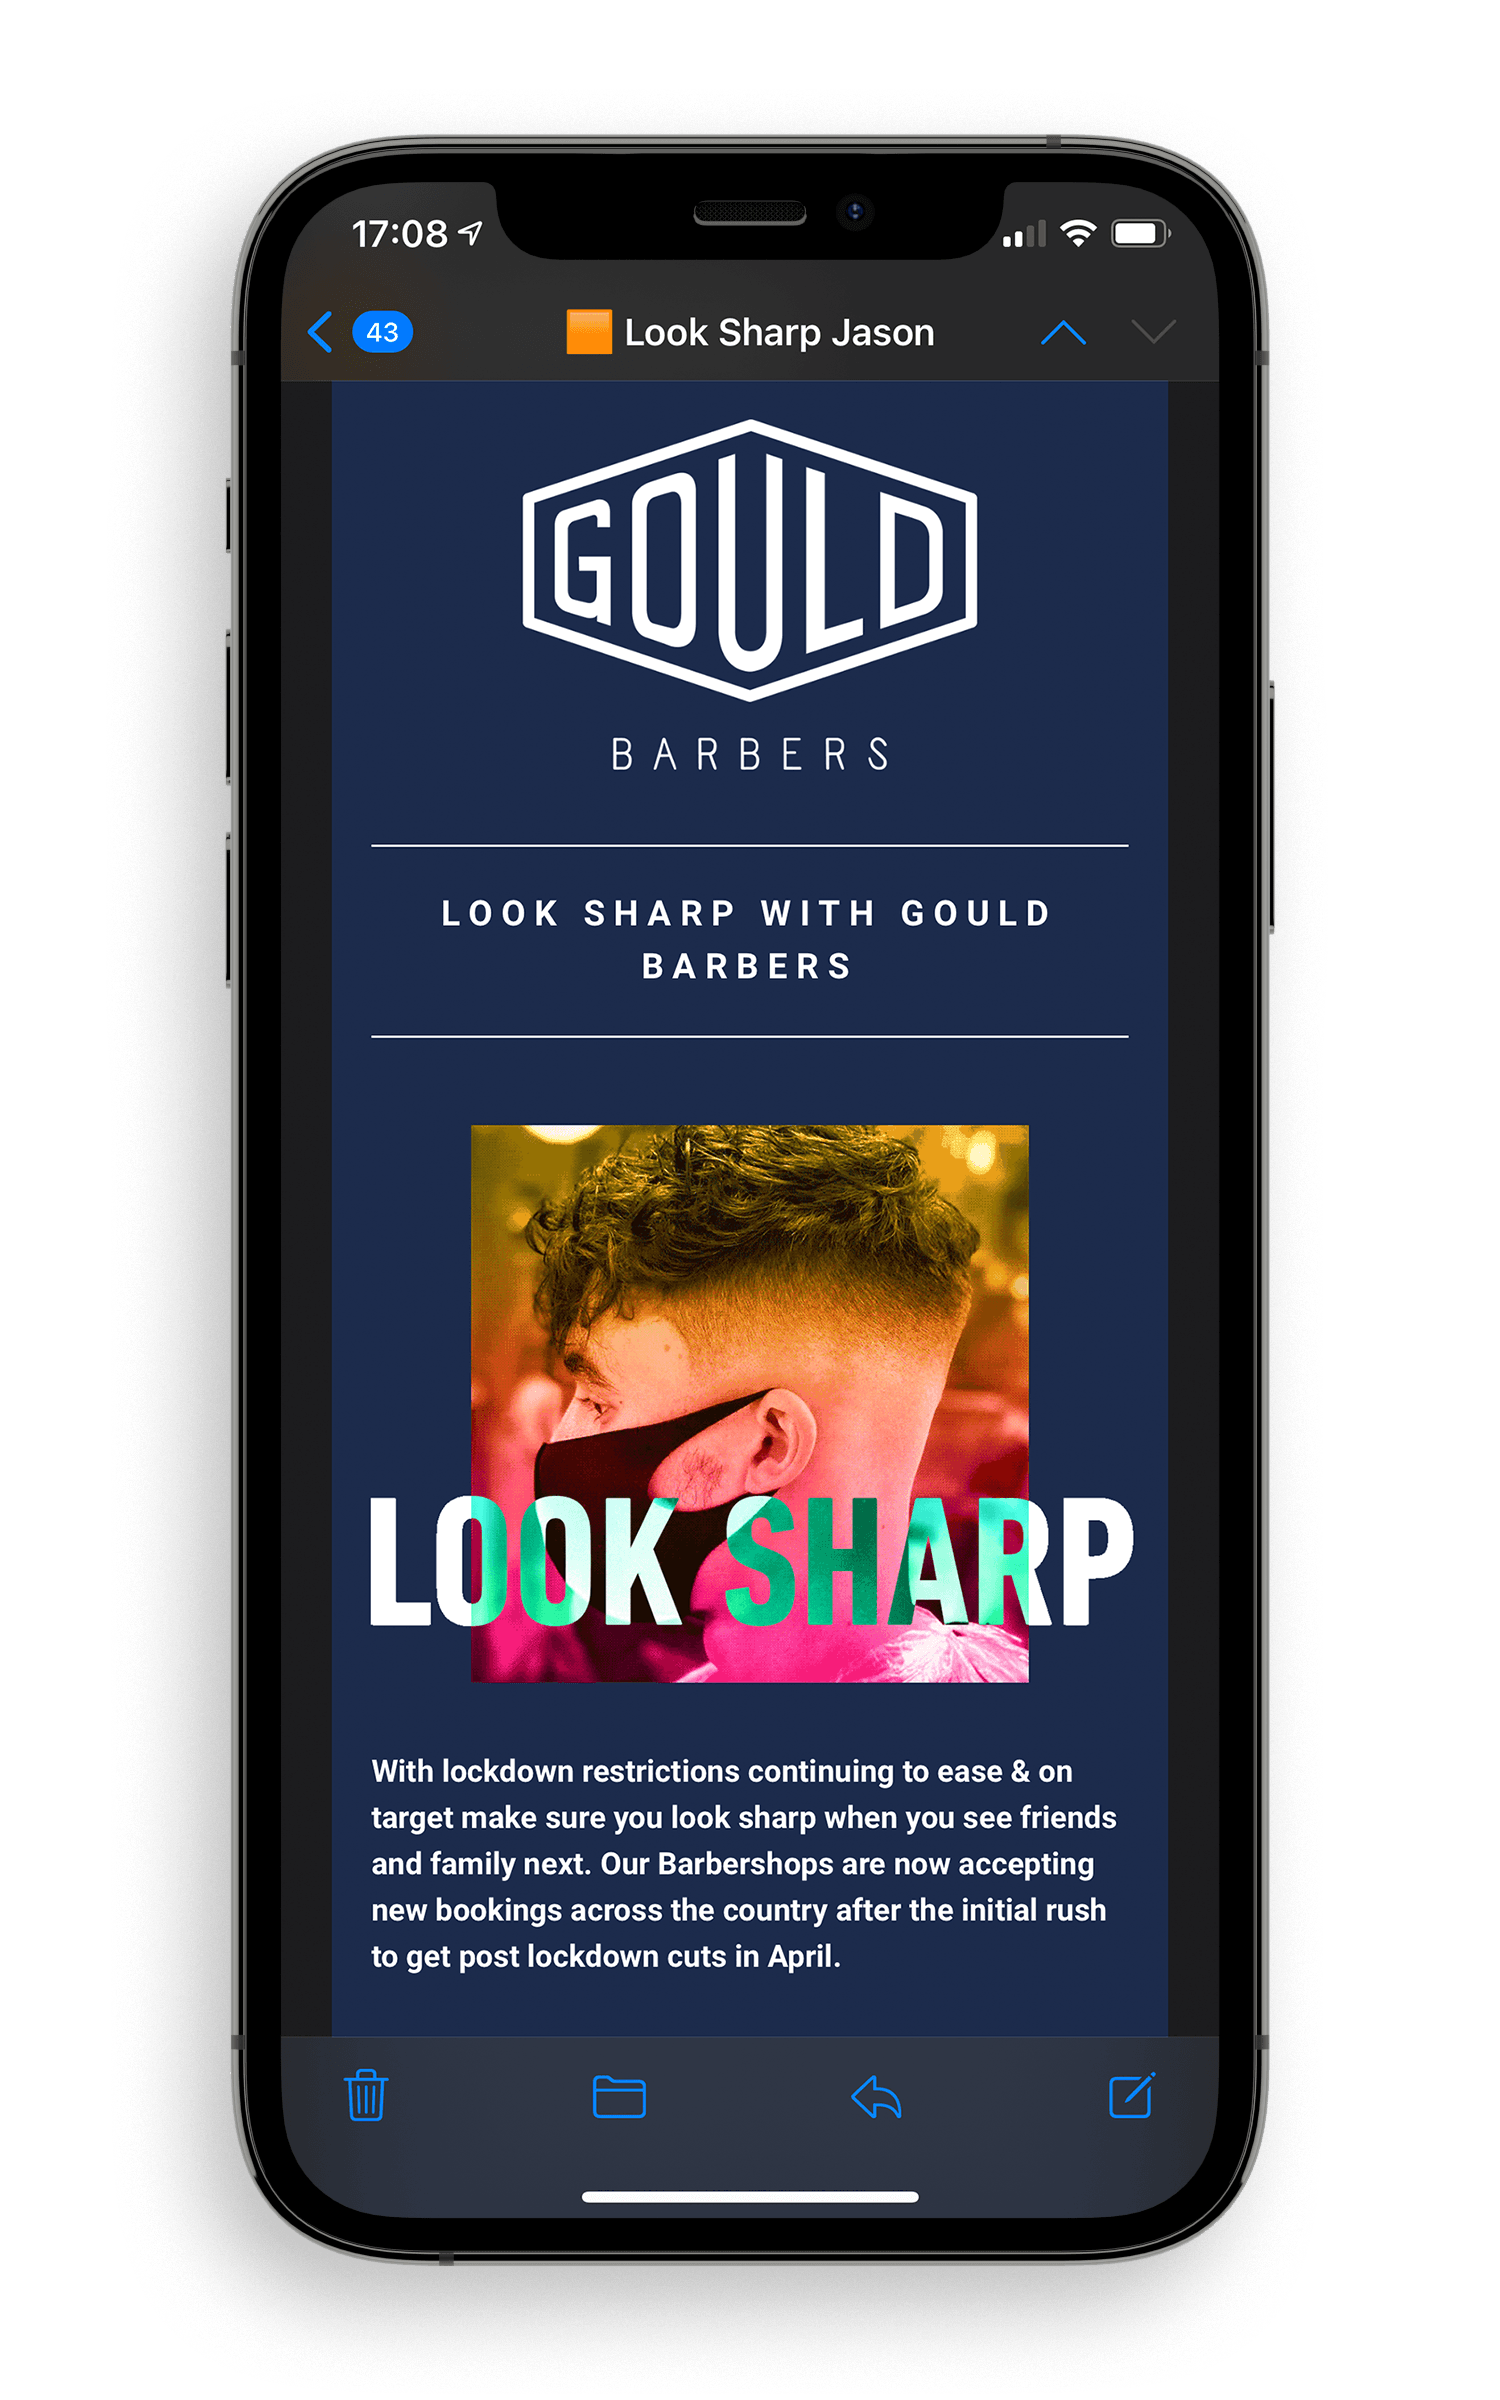 Gould Barbers Email Campaign by This is Fuller